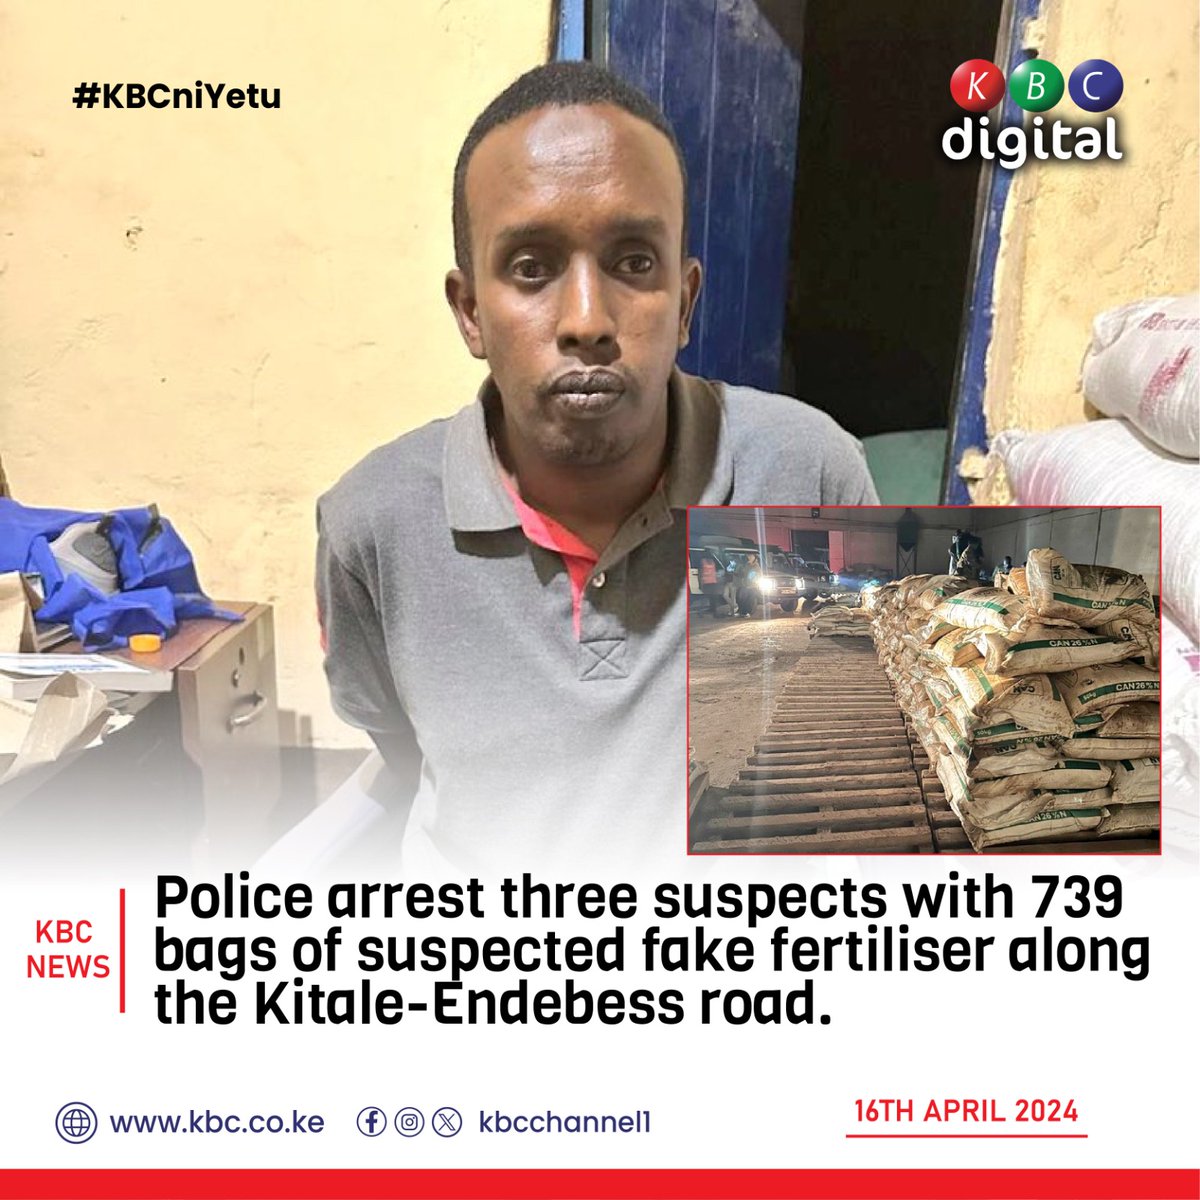 Police arrest three suspects with 739 bags of suspected fake fertiliser along the Kitale-Endebess road. #KBCniYetu